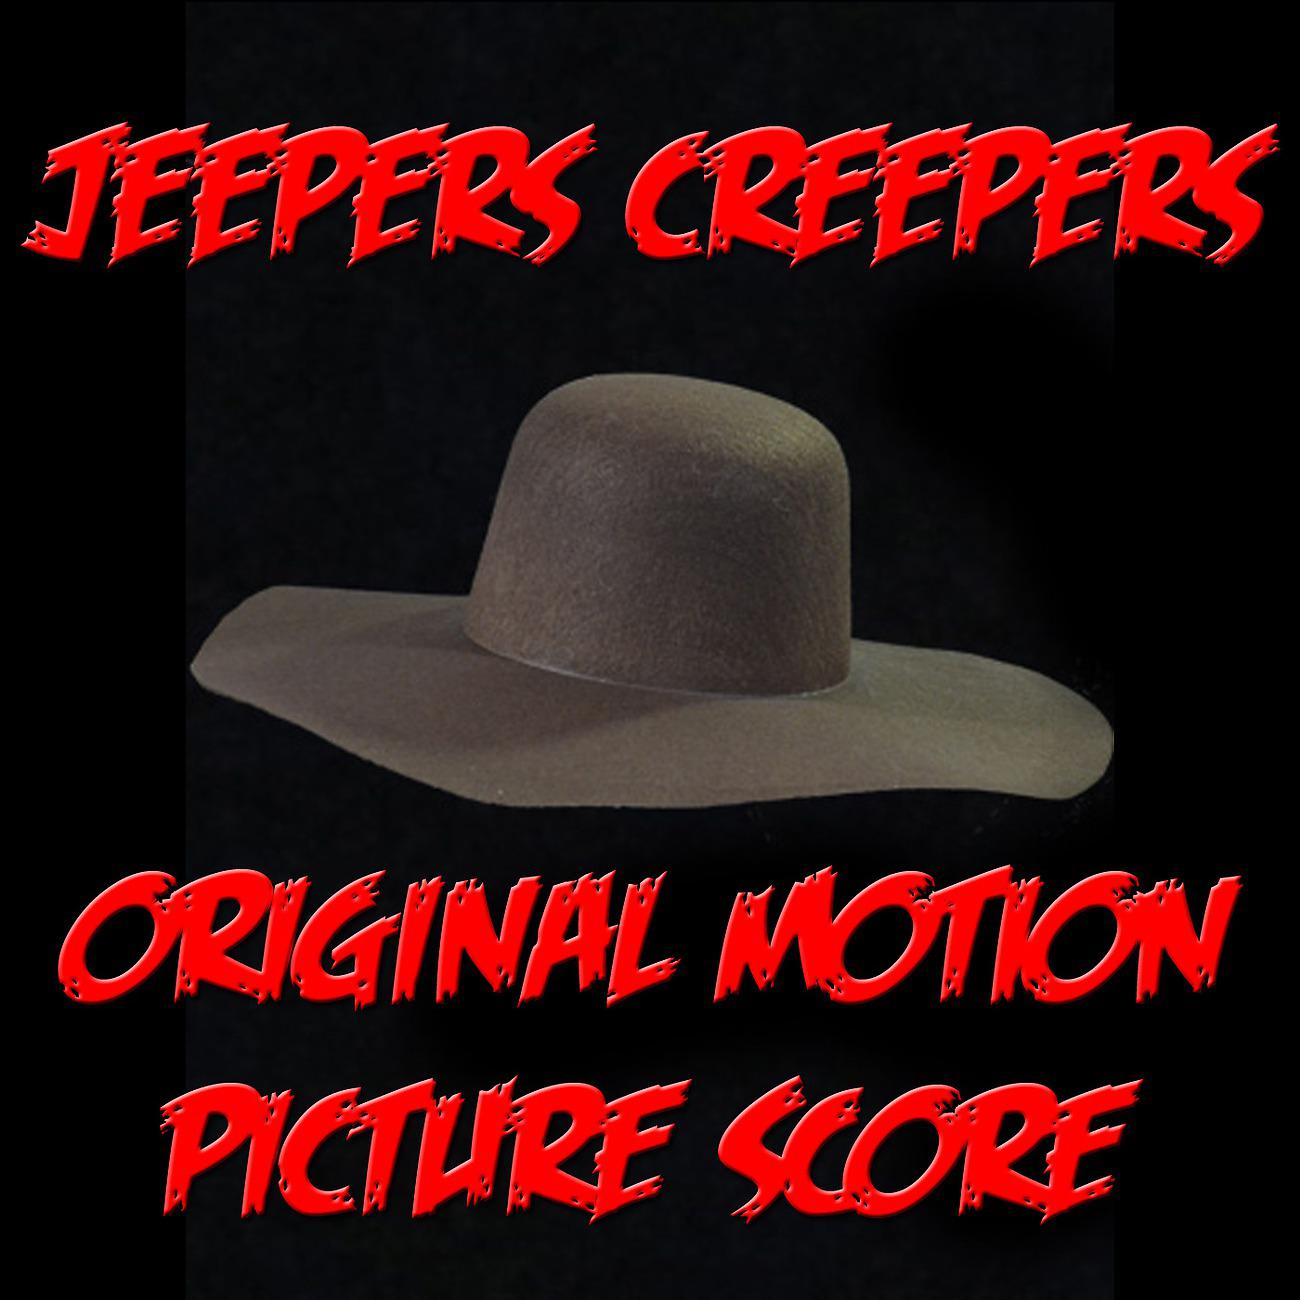 Постер альбома 'Jeepers Creepers' Original Motion Picture Score